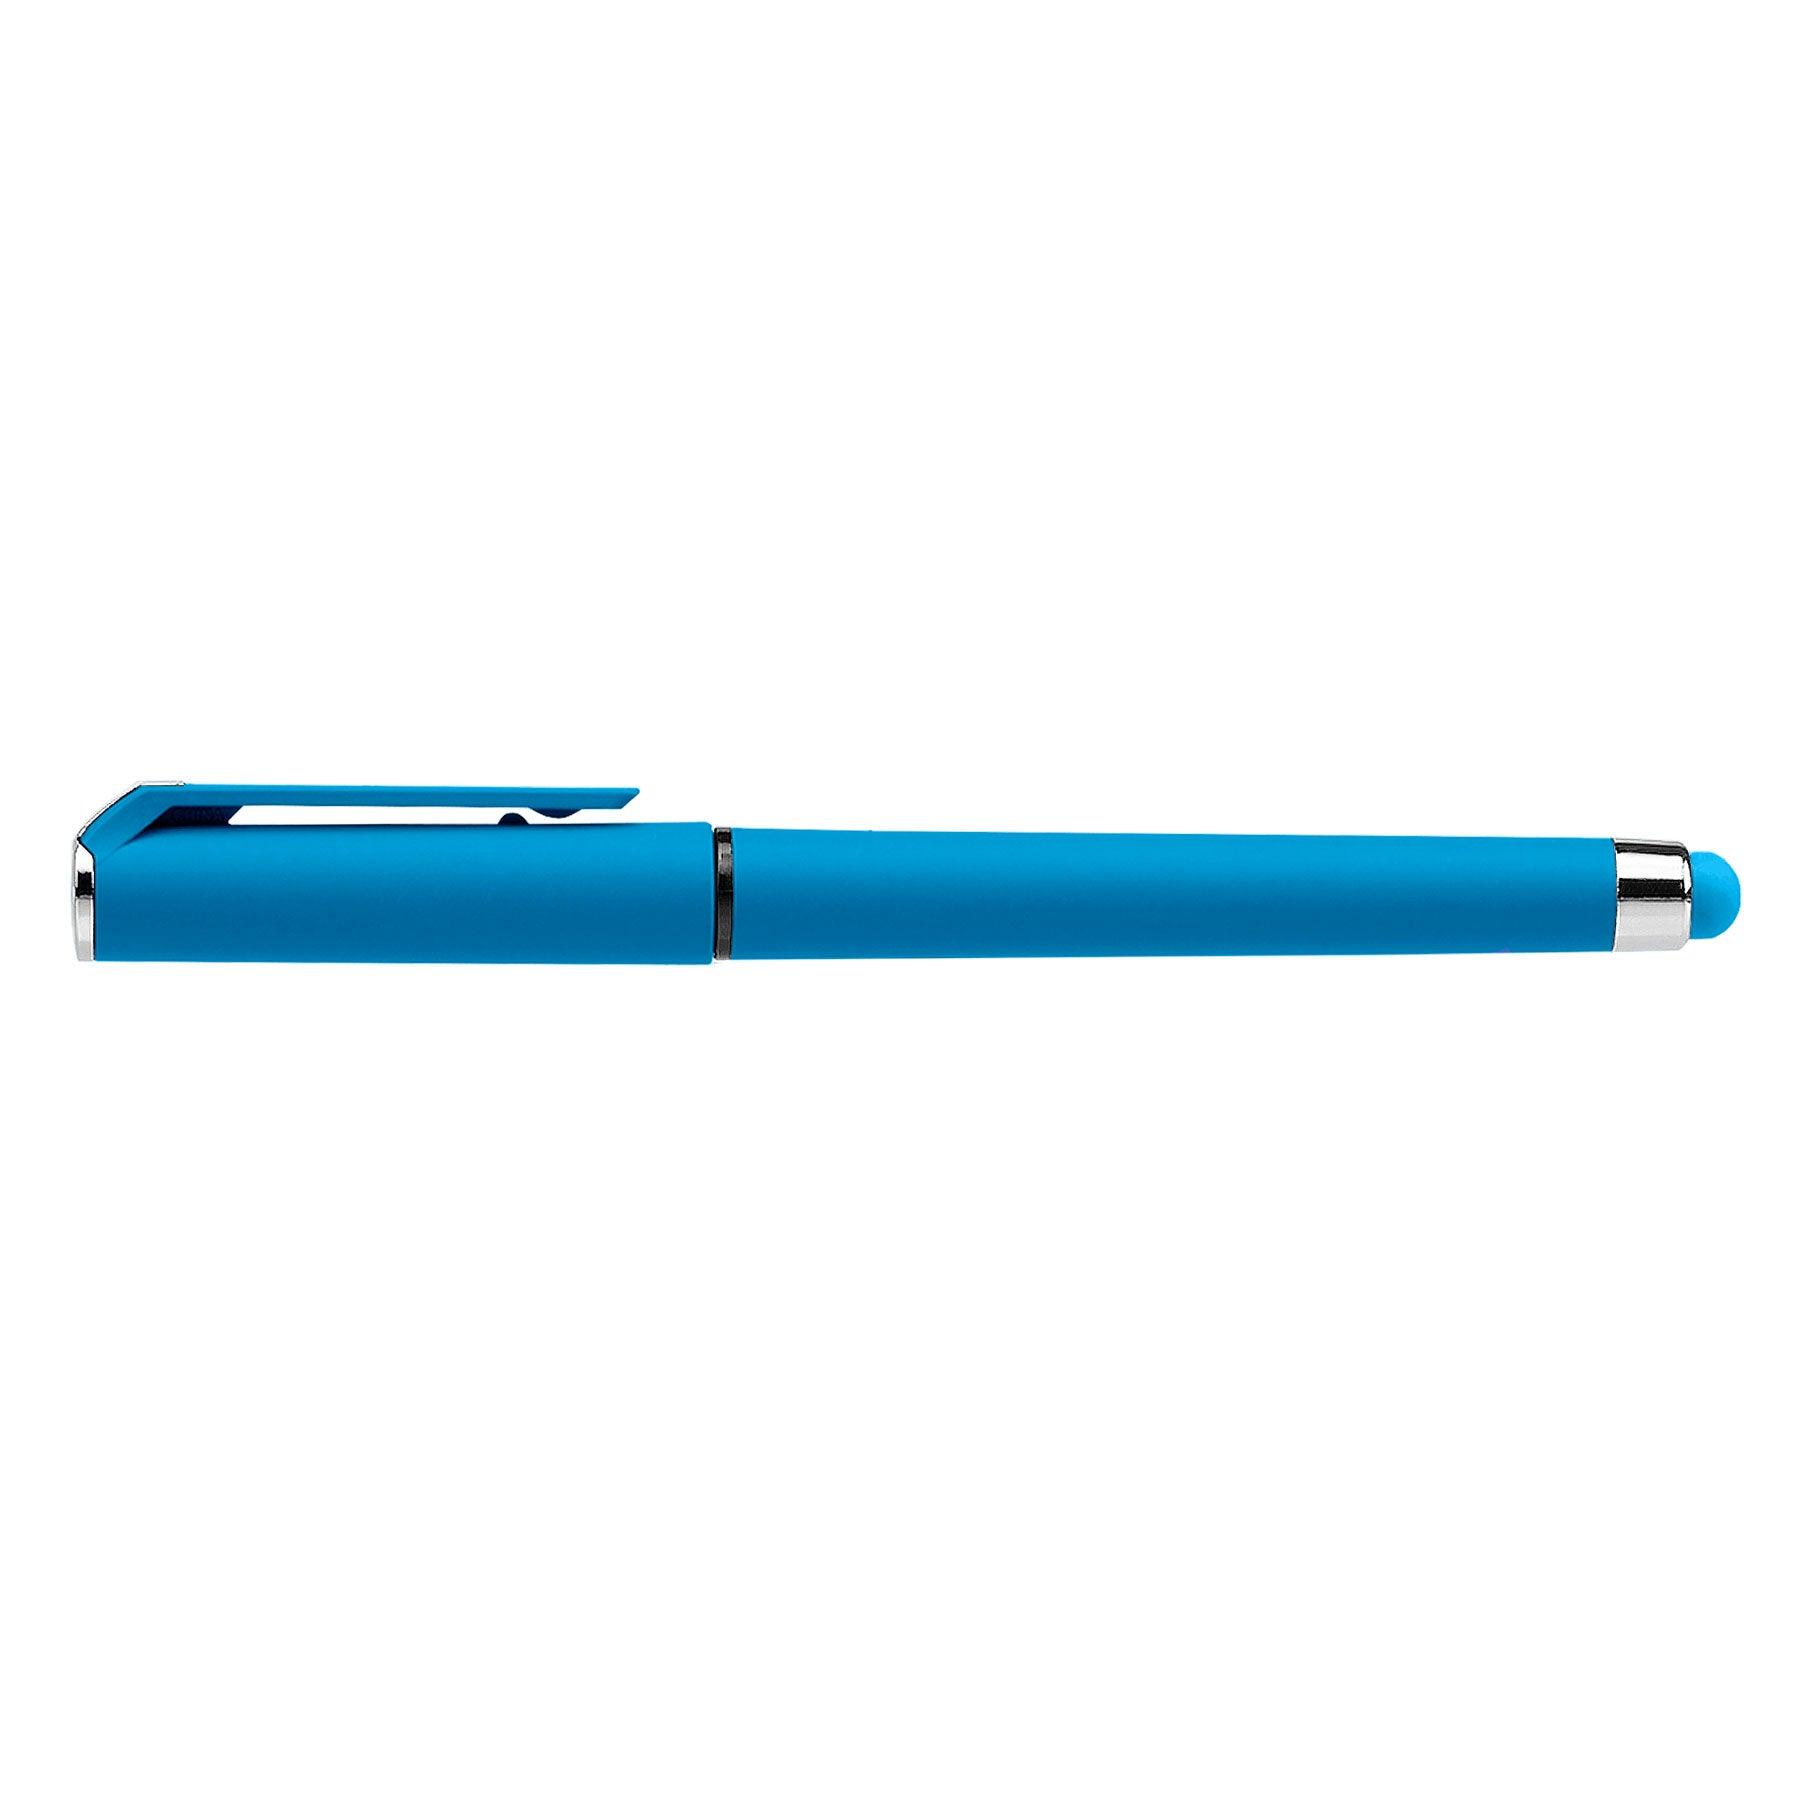 Promo Pens - Persopens Promotional Products LTD